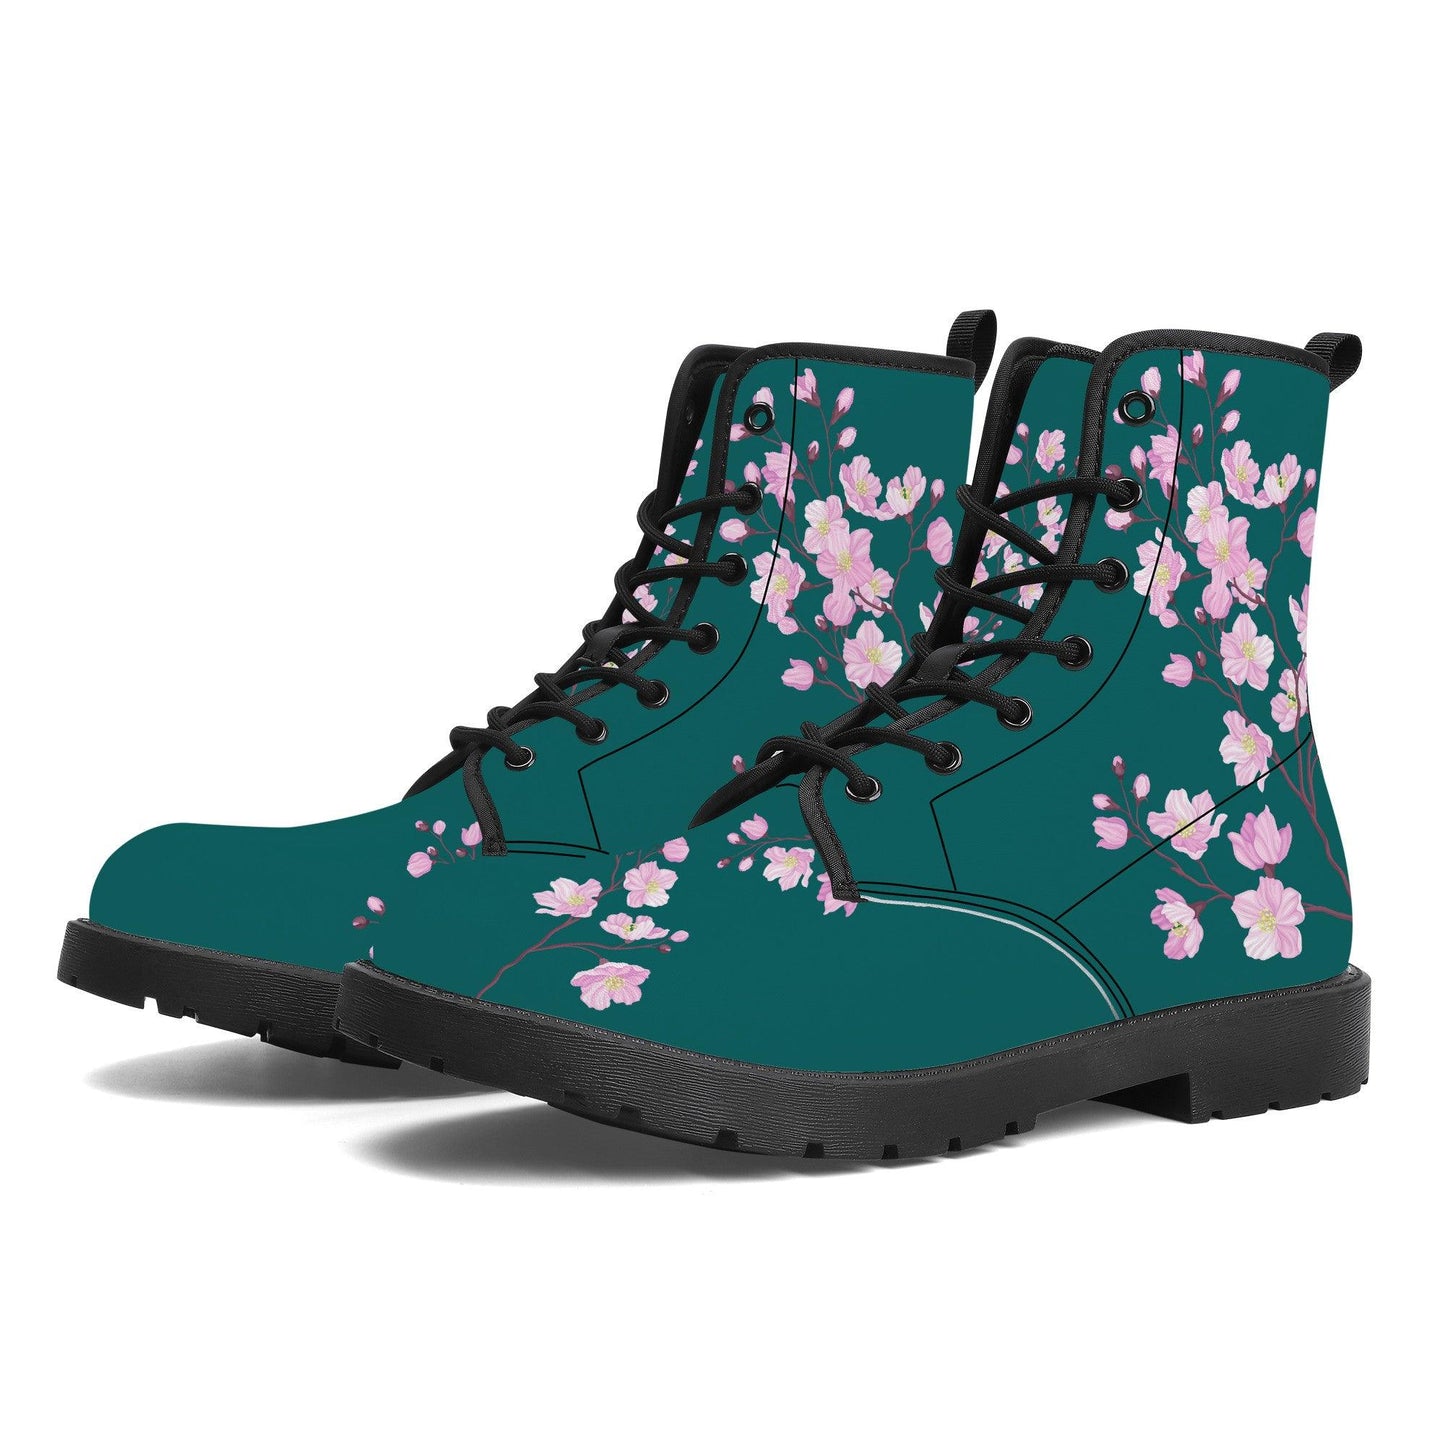 Dark Green Vegan Leather Boots with Cherry Blossom